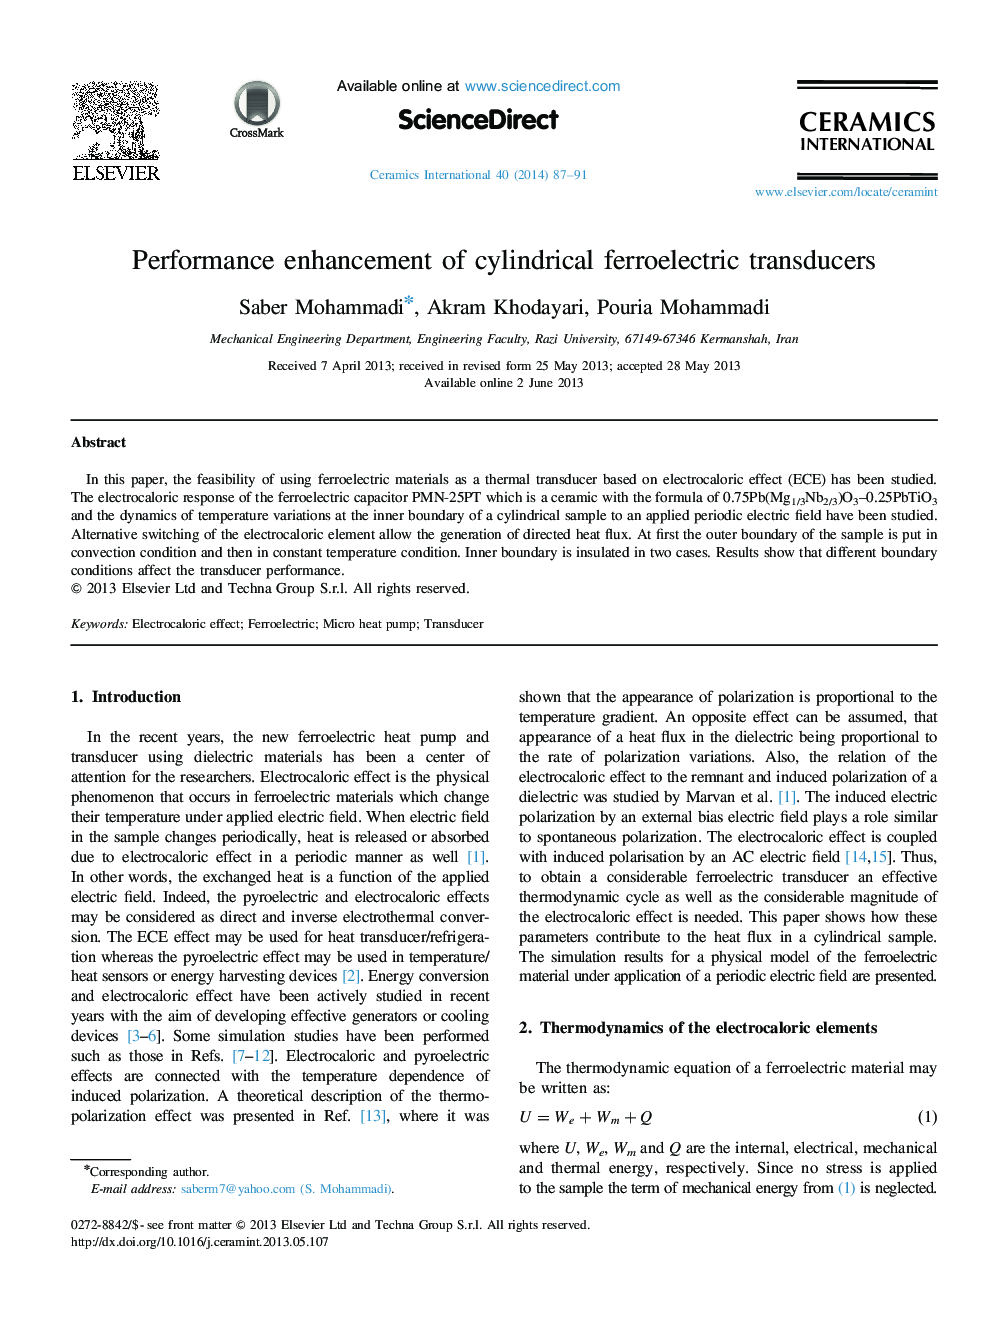 Performance enhancement of cylindrical ferroelectric transducers